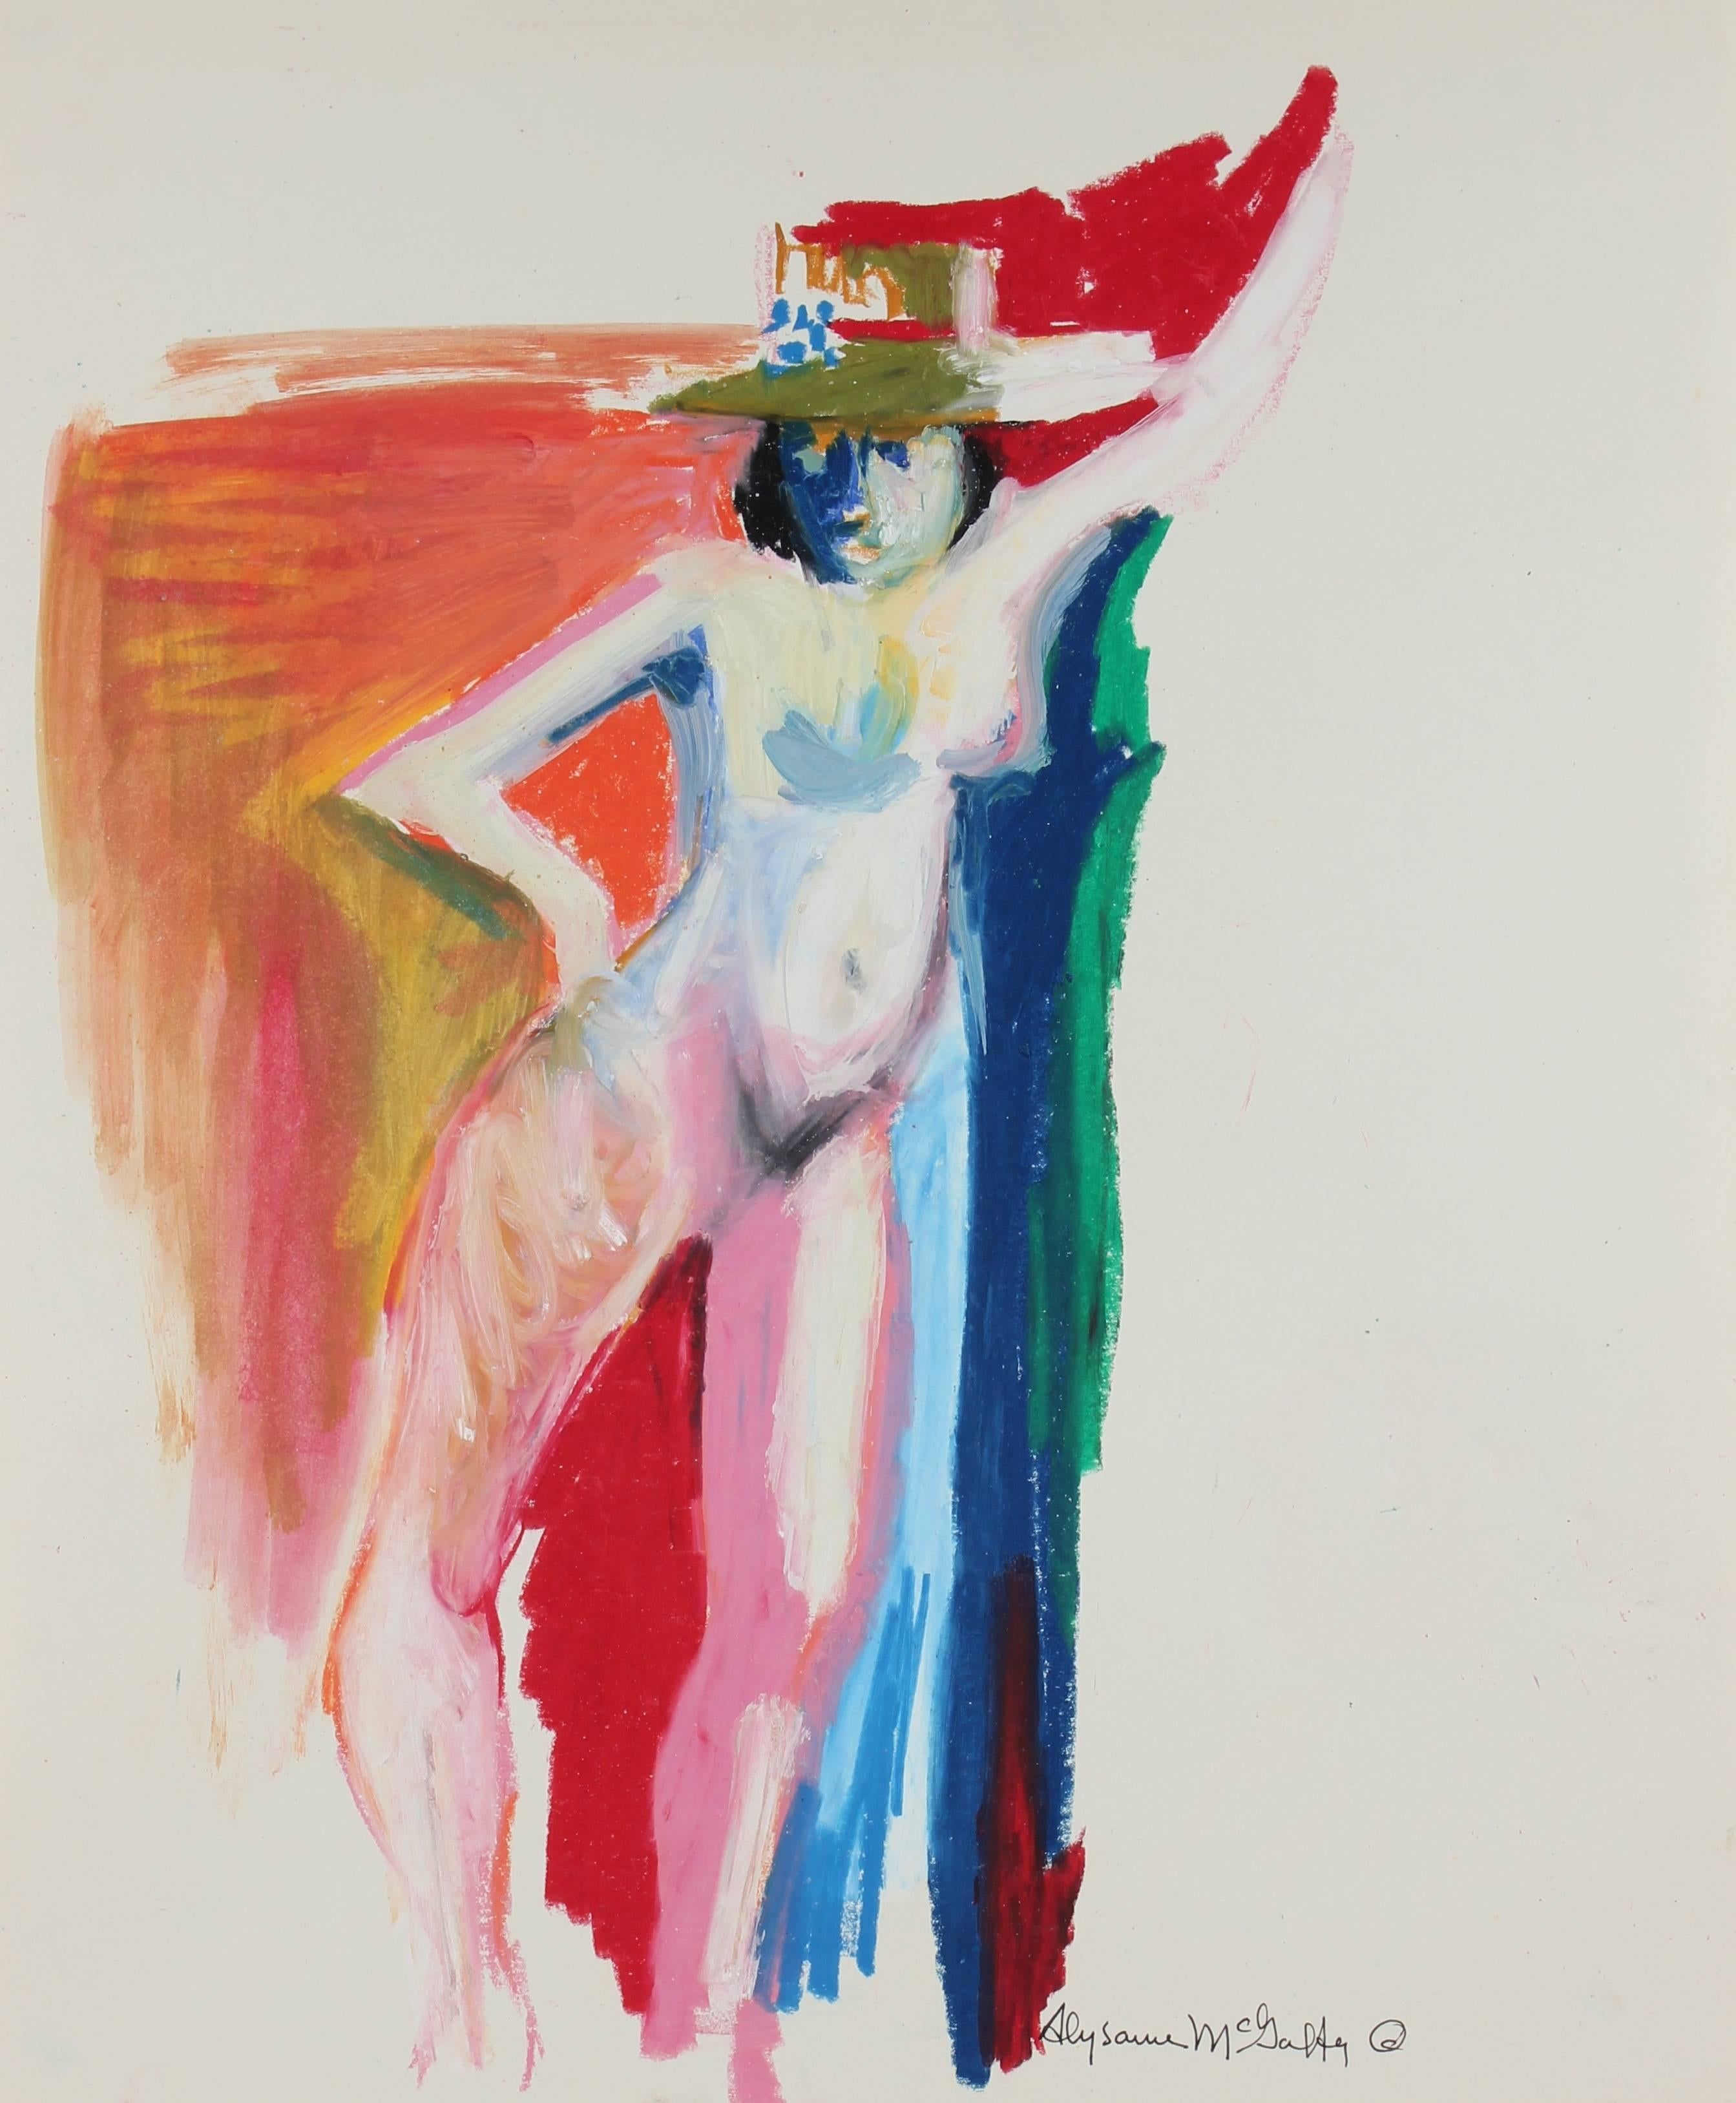 Colorful Nude Figure with Hat, Distemper and Pastel Drawing on Paper, 1950s-60s - Art by Alysanne McGaffey